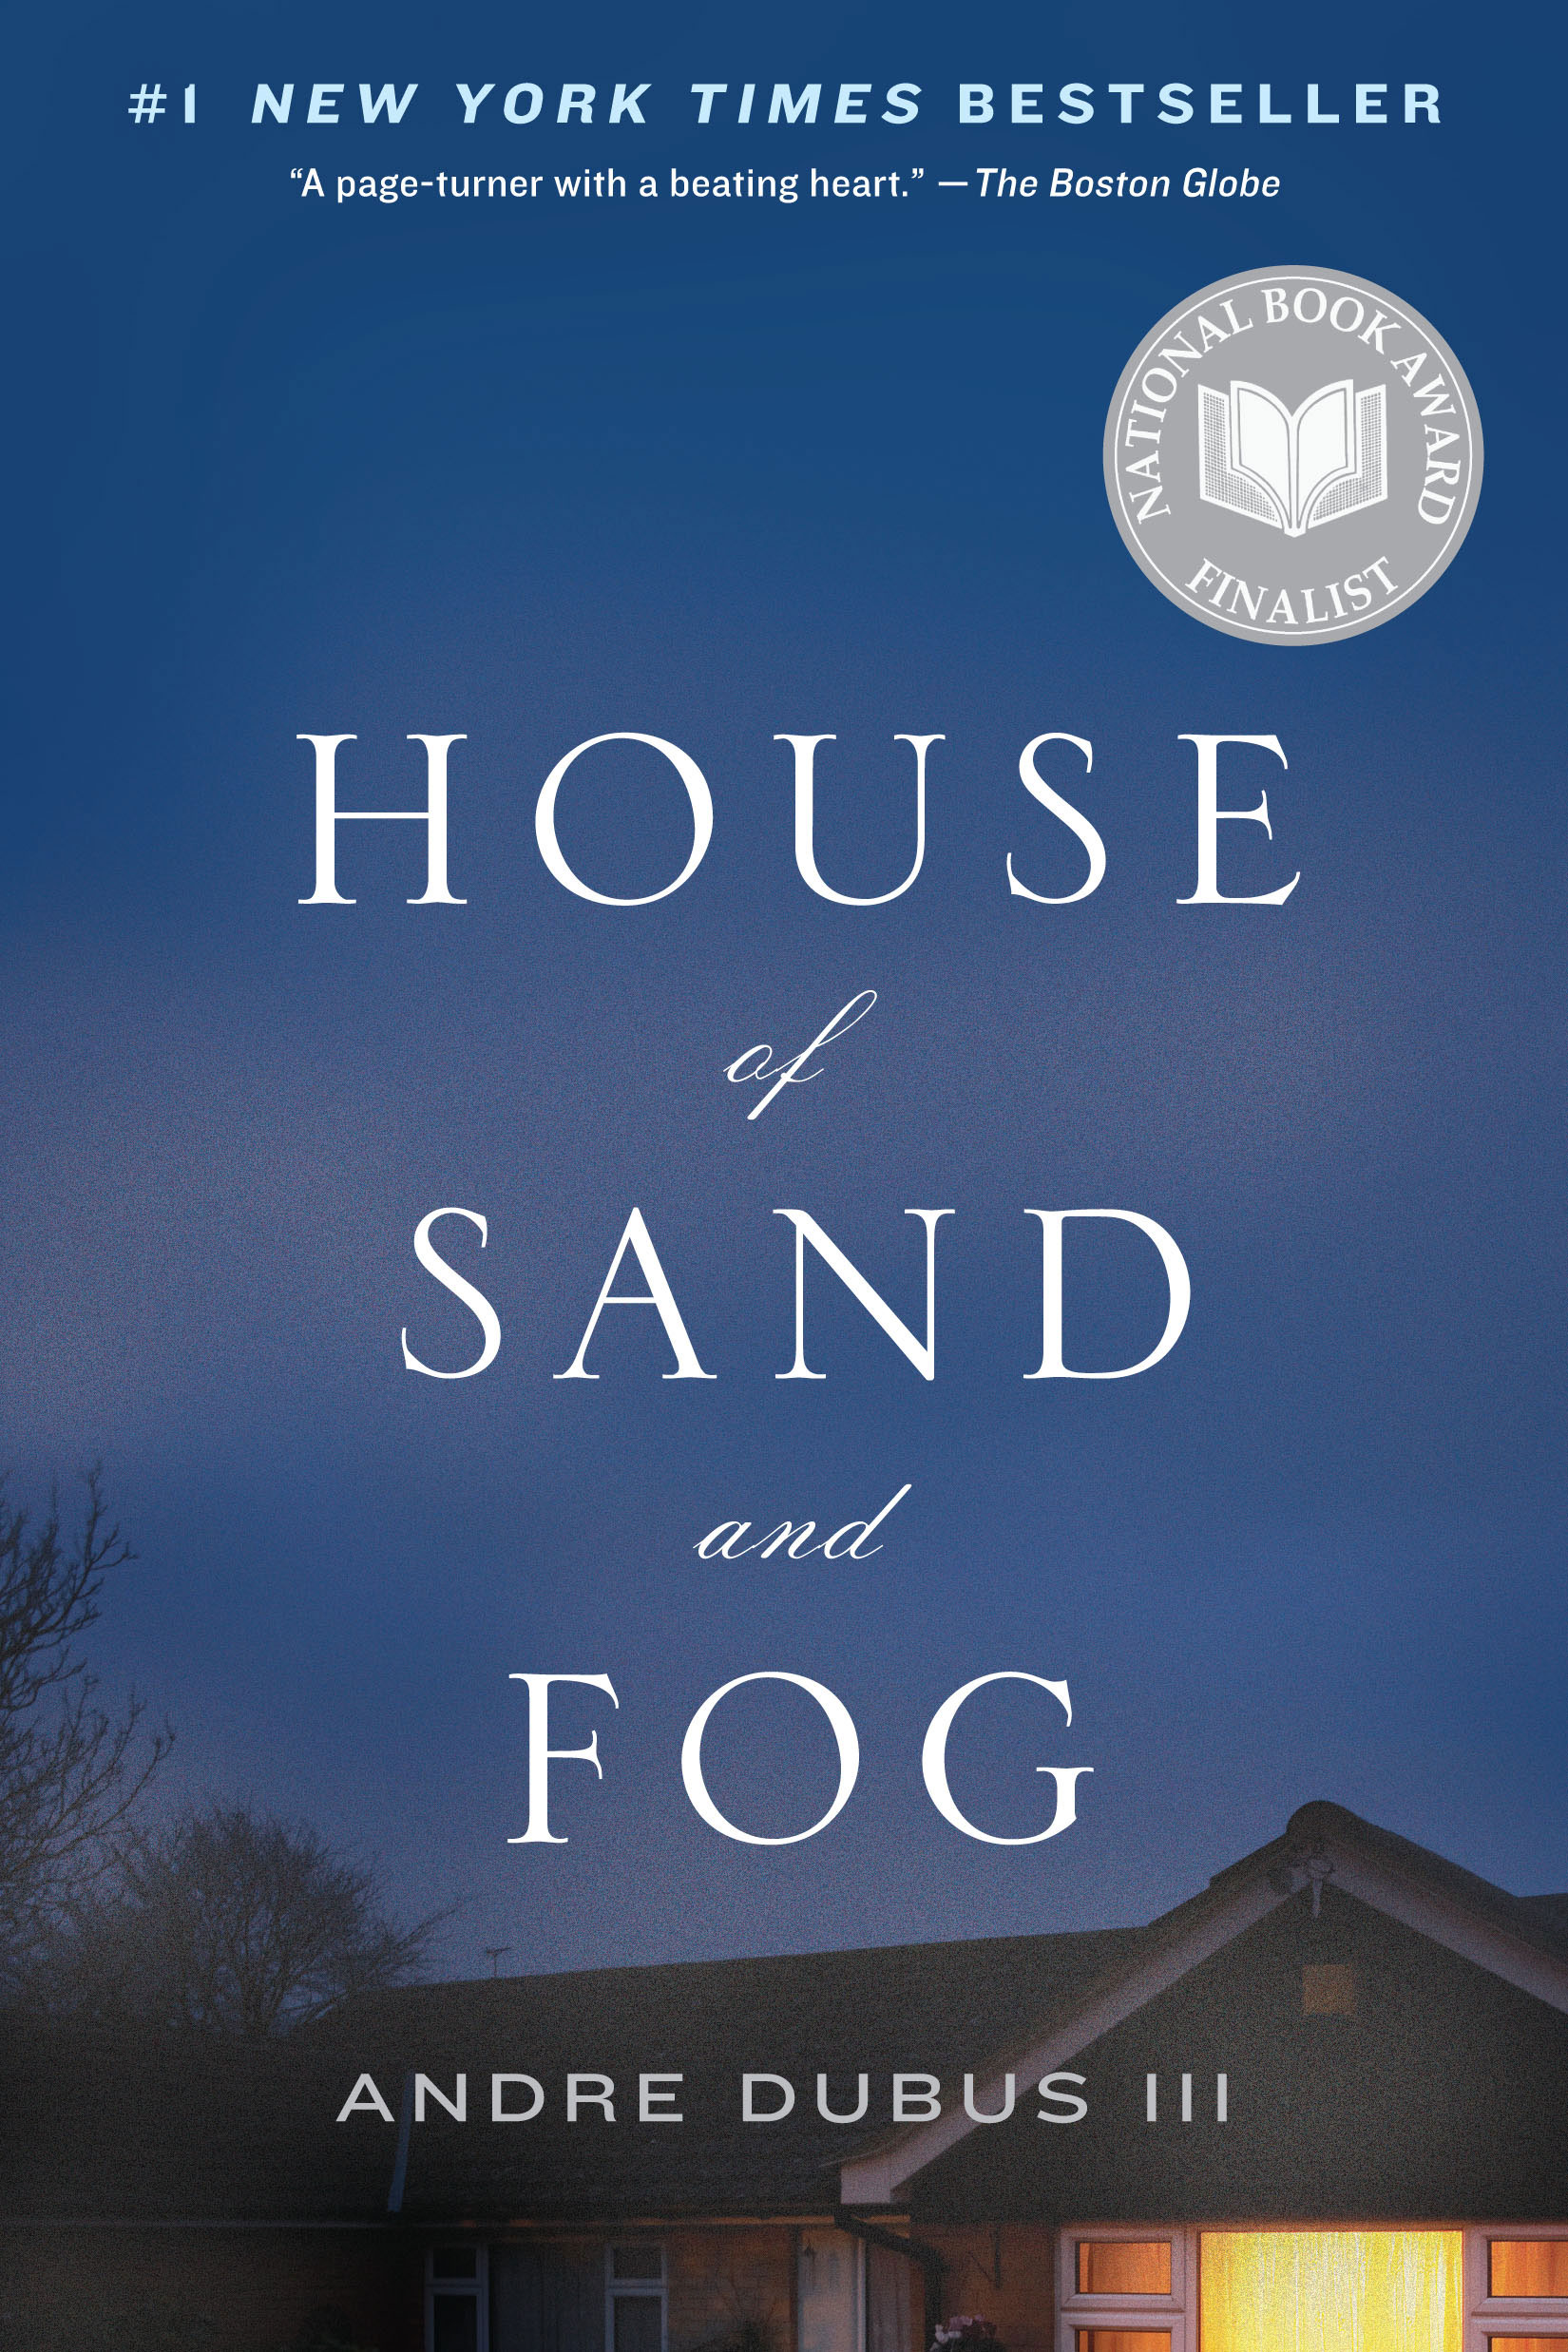 "House of Sand and Fog" by Andre Dubus, III